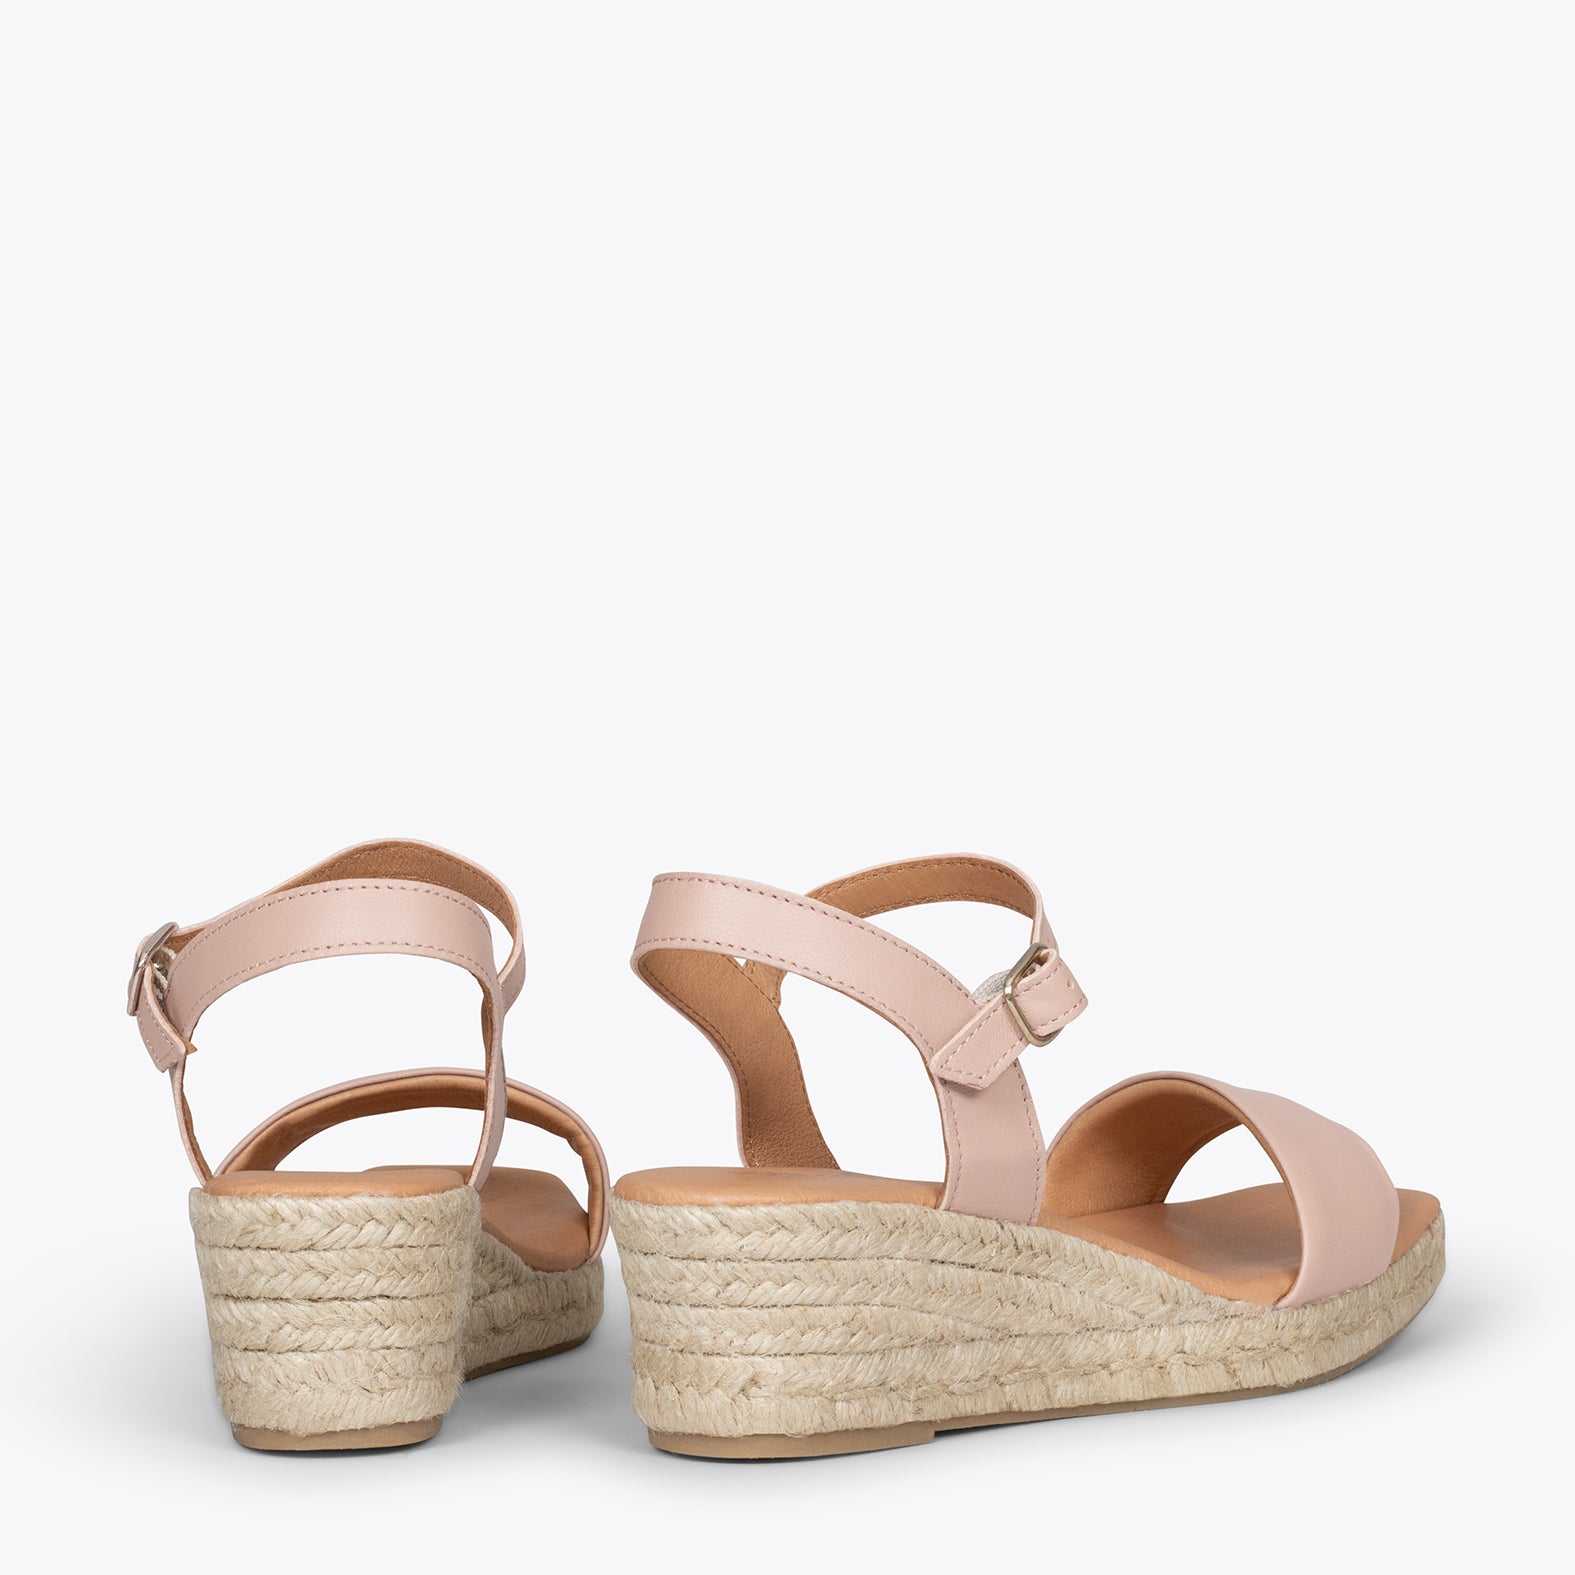 JEREZ – MAKE-UP espadrilles with comfortable wedge